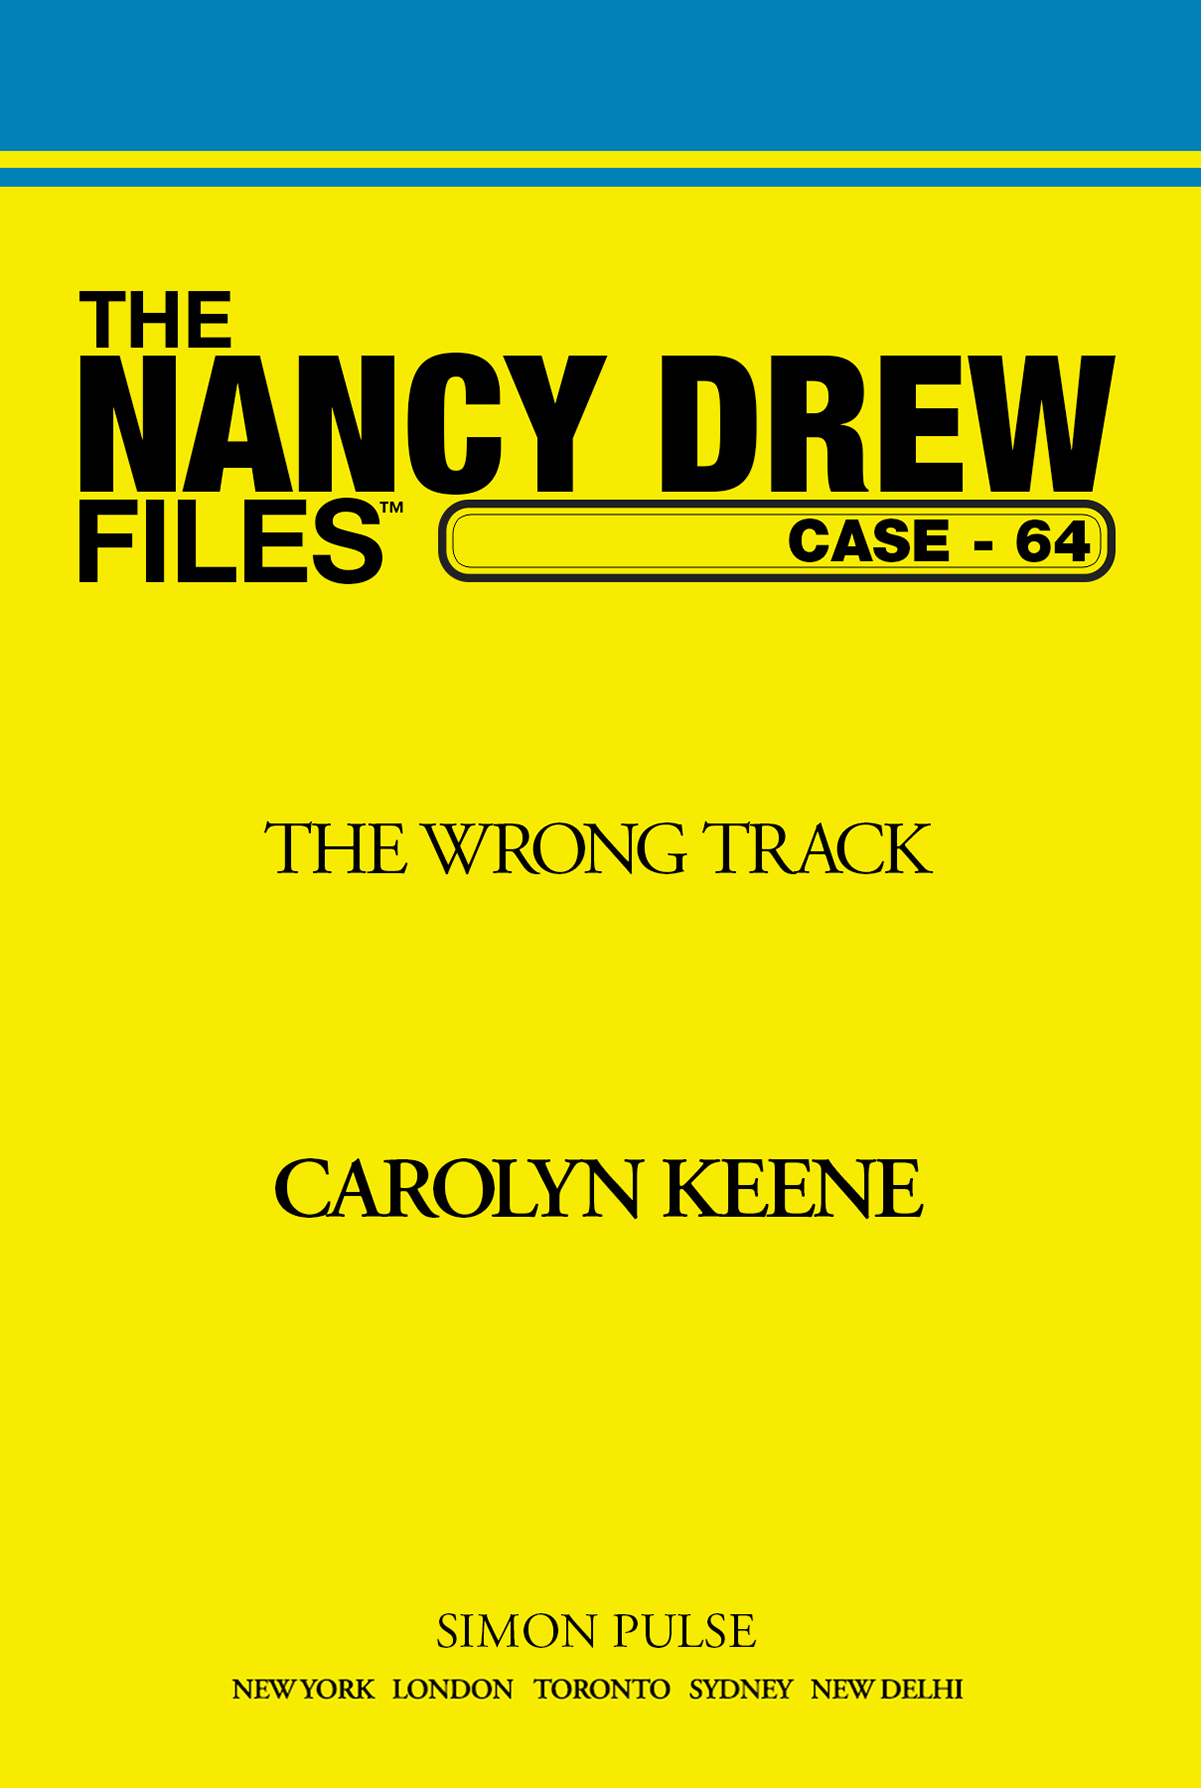 The Wrong Track by Carolyn Keene